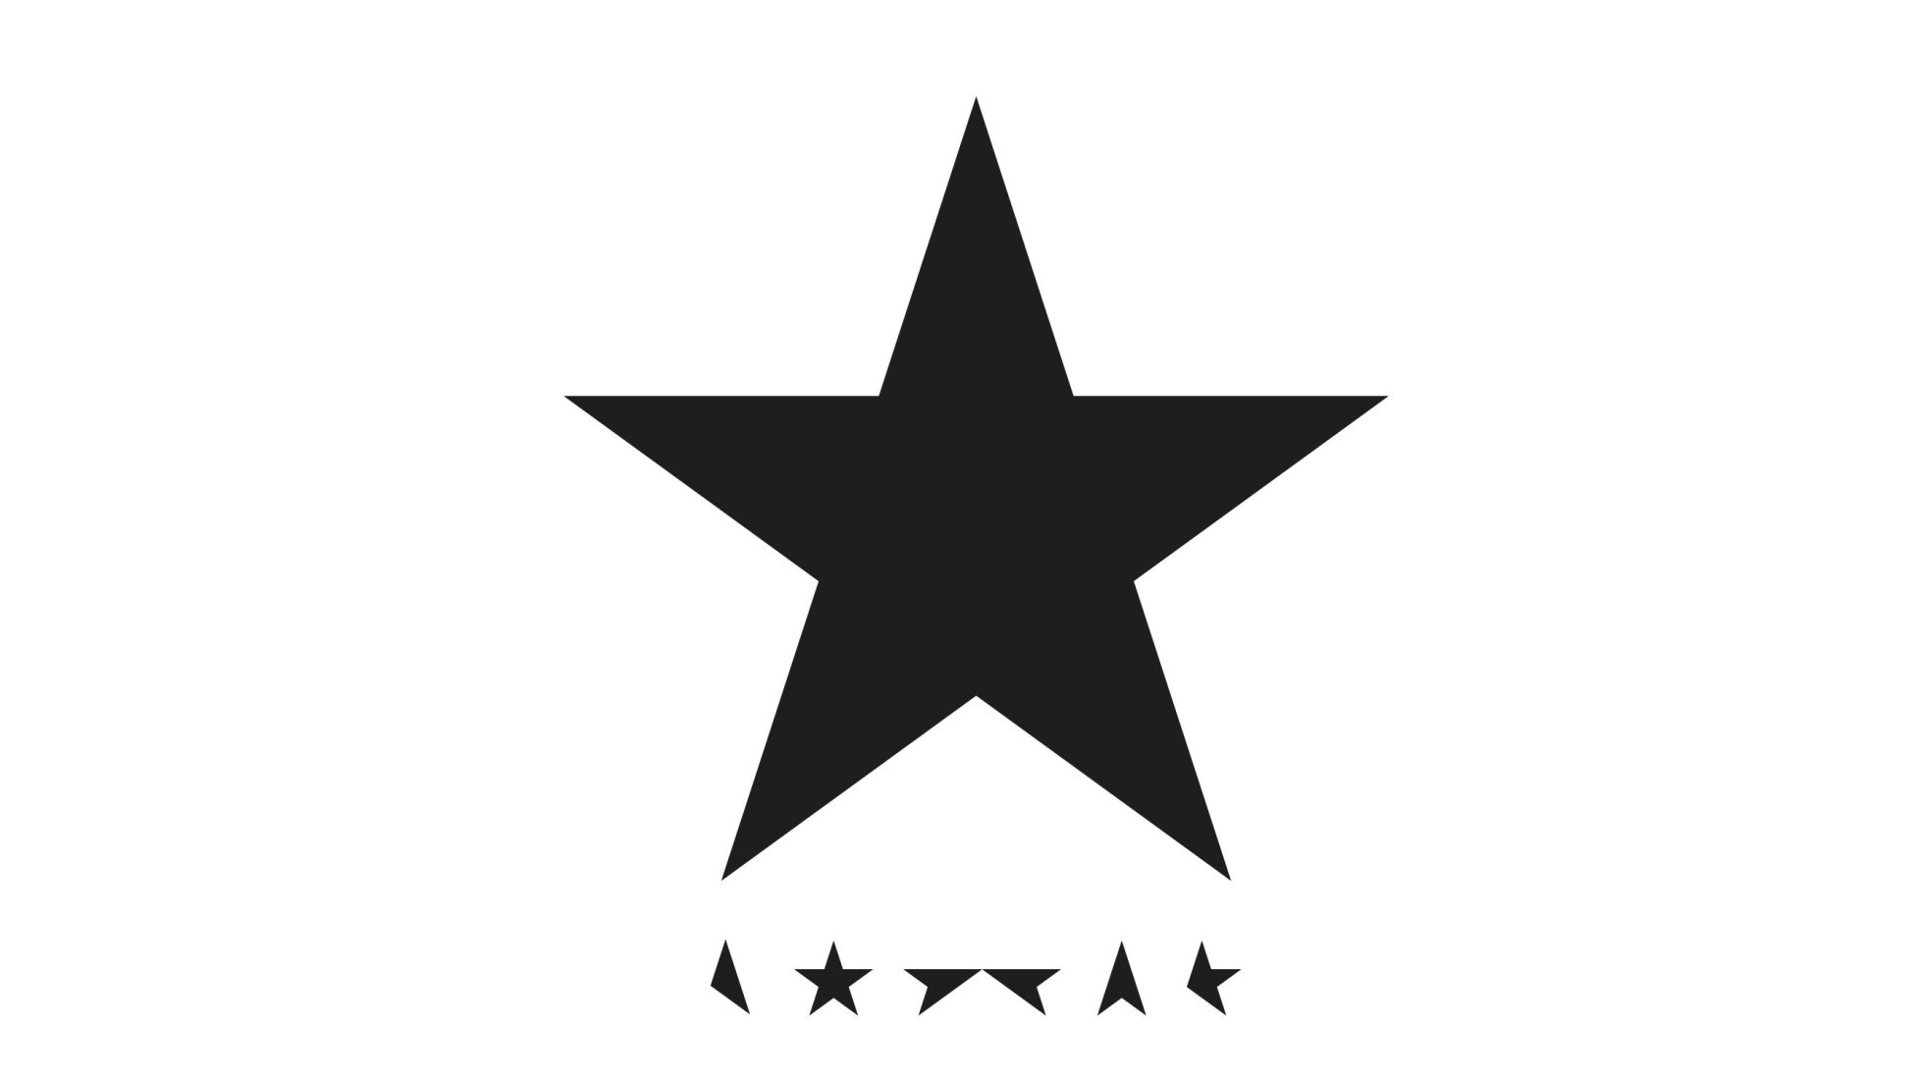 I made a wallpaper set out of the art of Blackstar, check it out